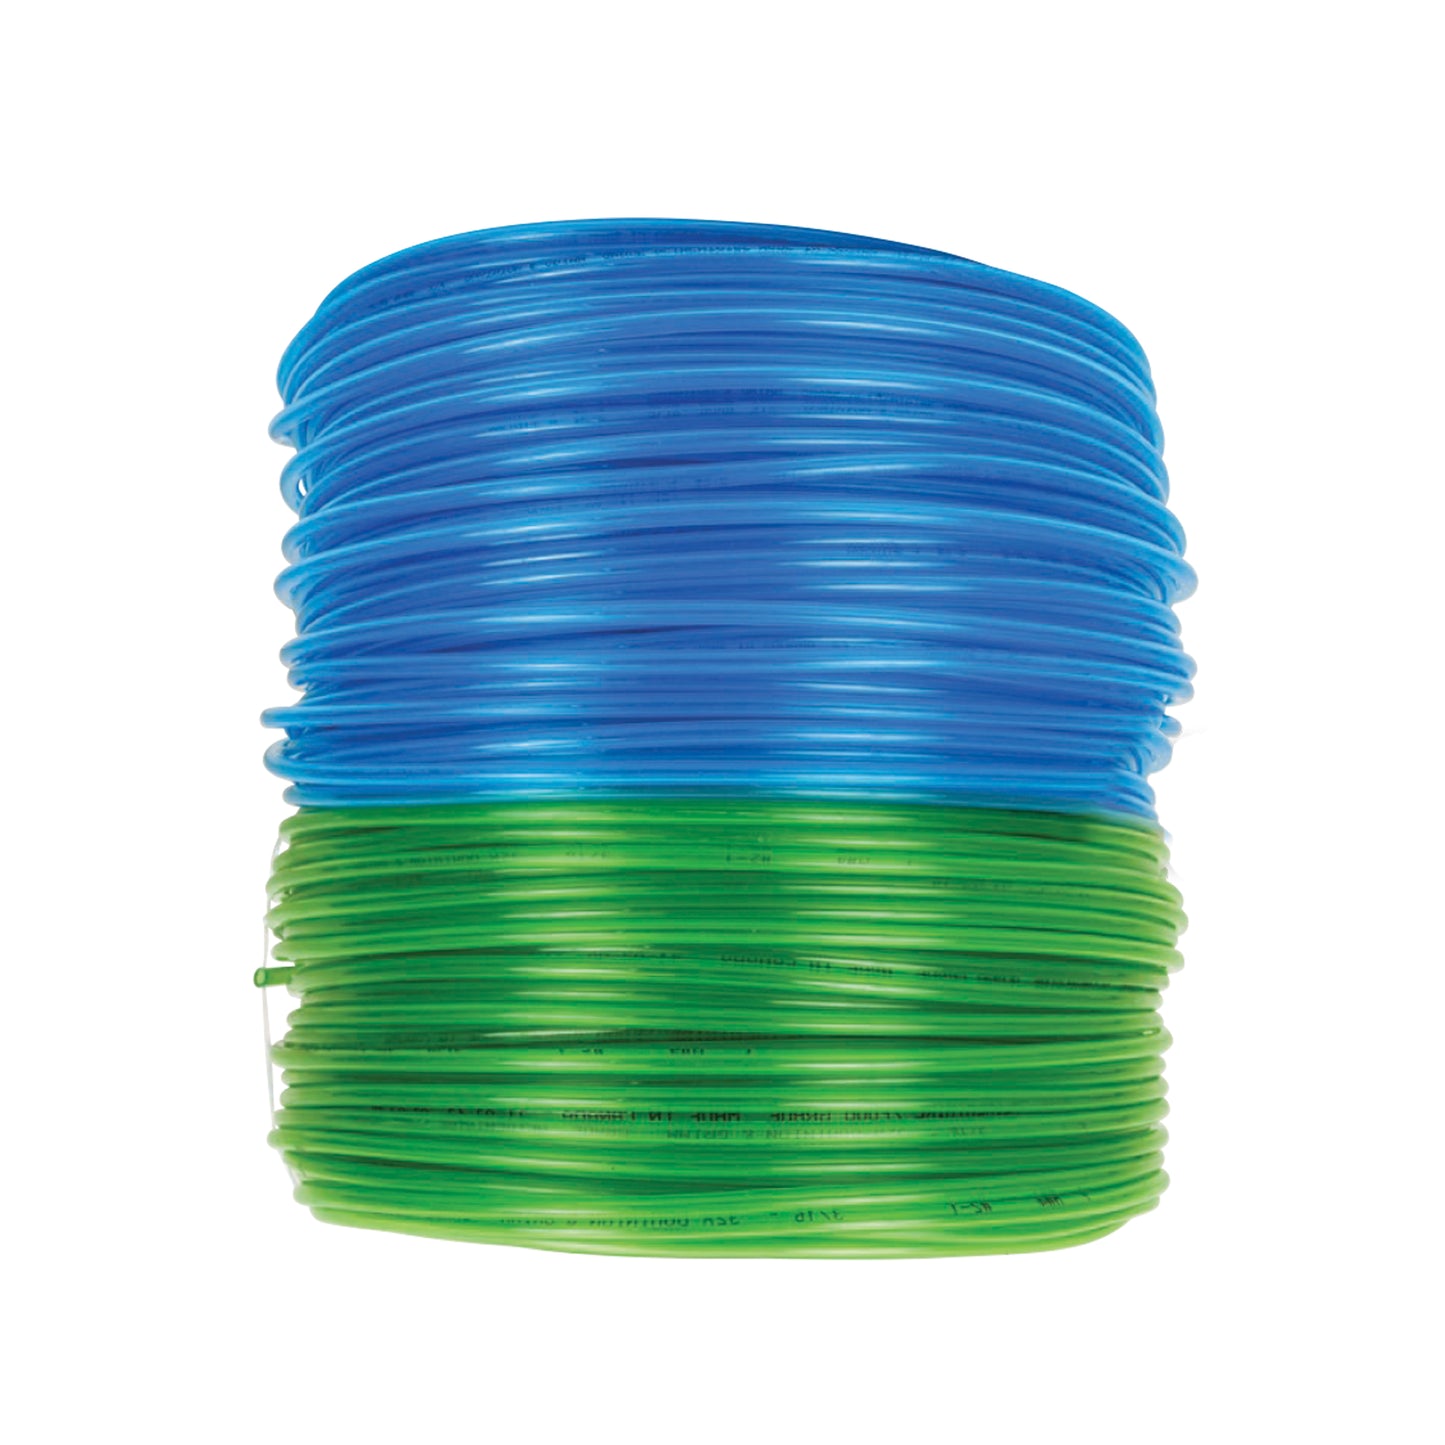 Tubing - 5/16 Blue or Green (500ft roll)